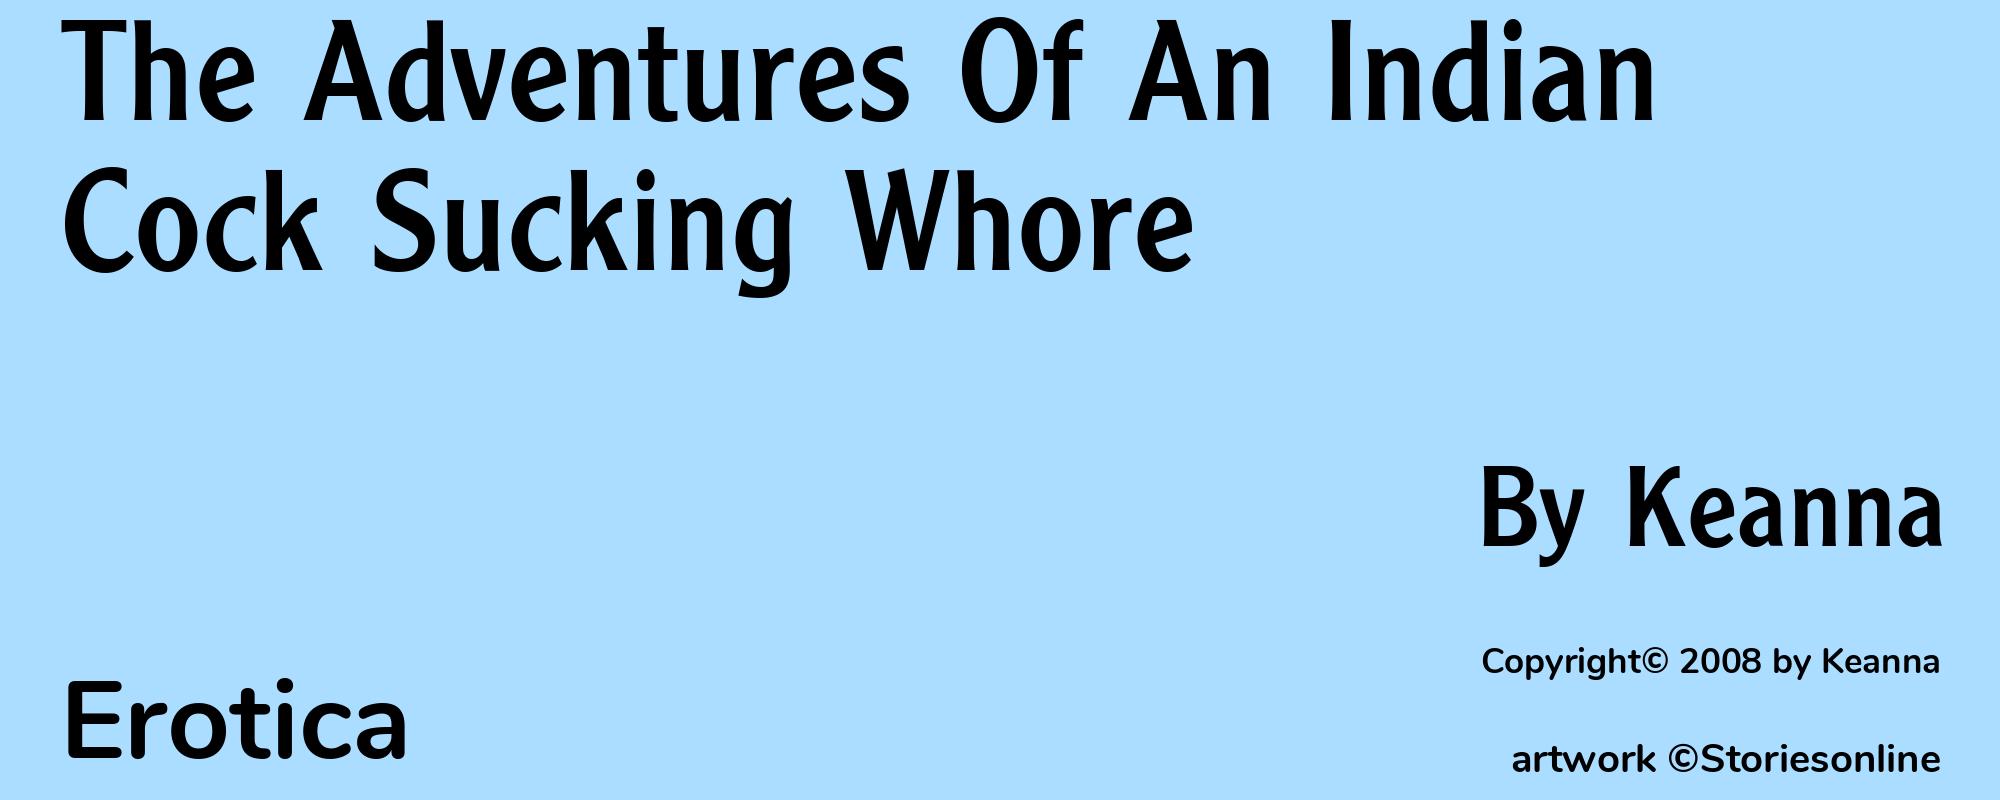 The Adventures Of An Indian Cock Sucking Whore - Cover